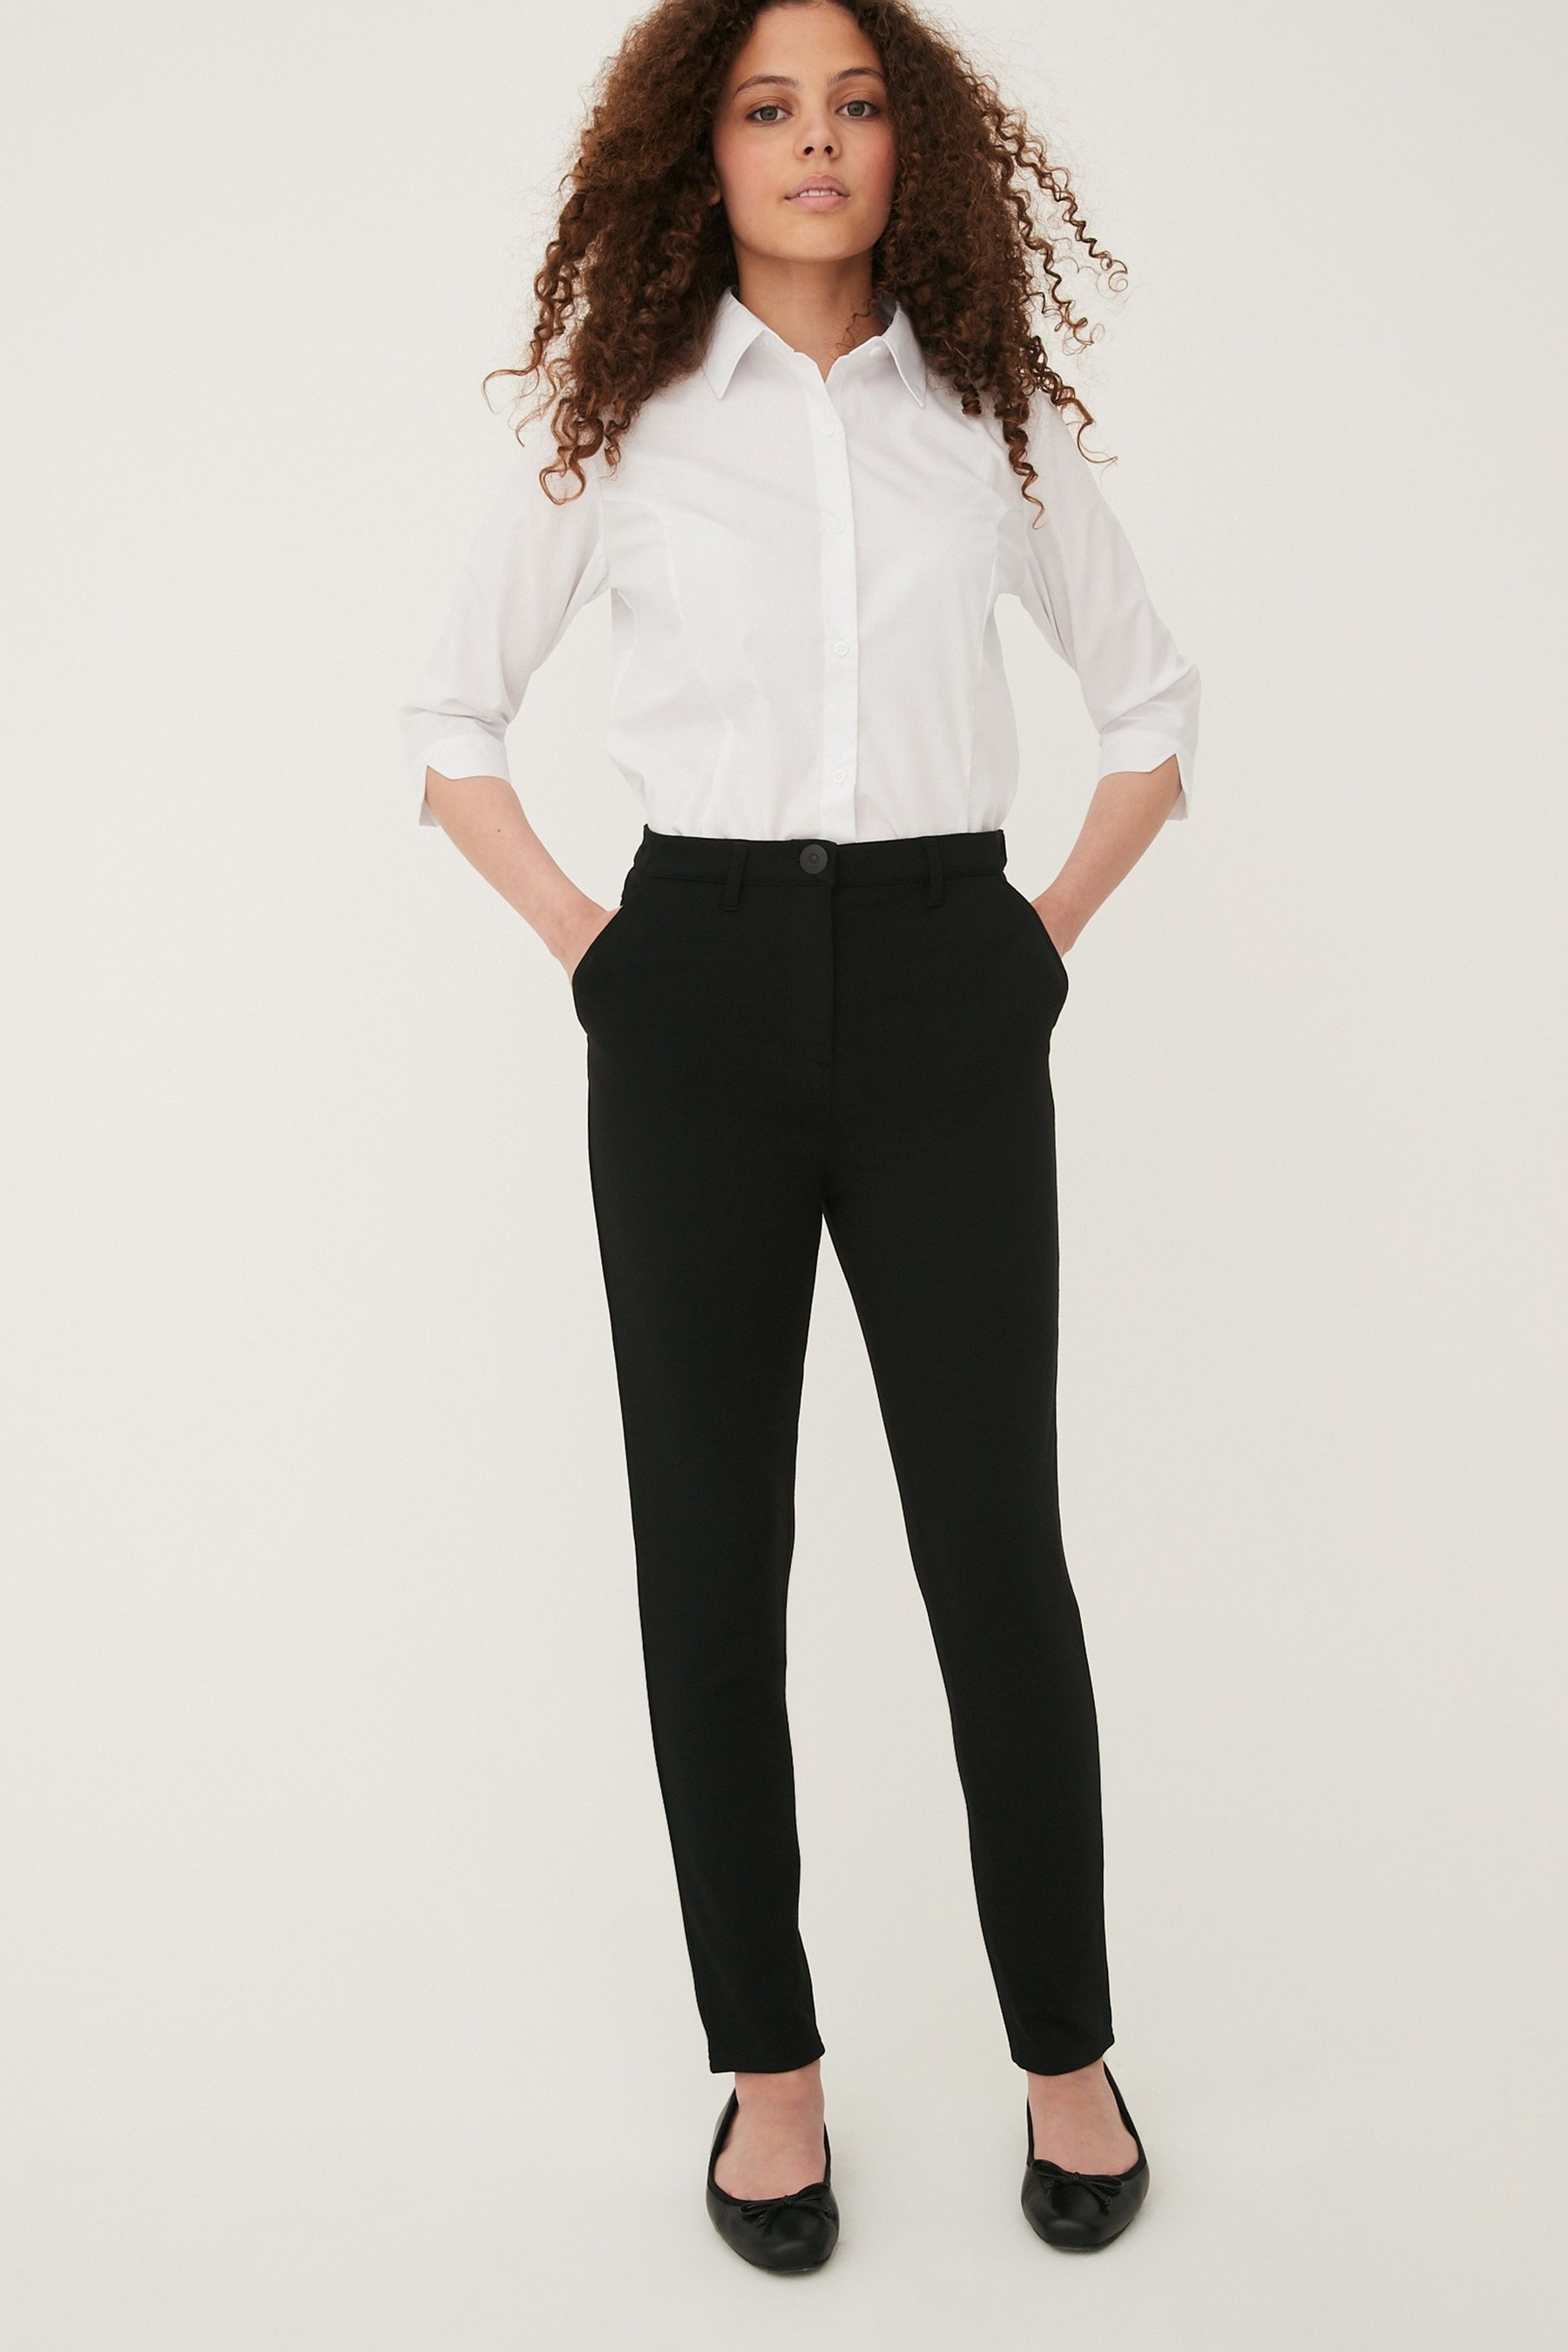 Buy Black Trousers  Pants for Women by CODE by Lifestyle Online  Ajiocom